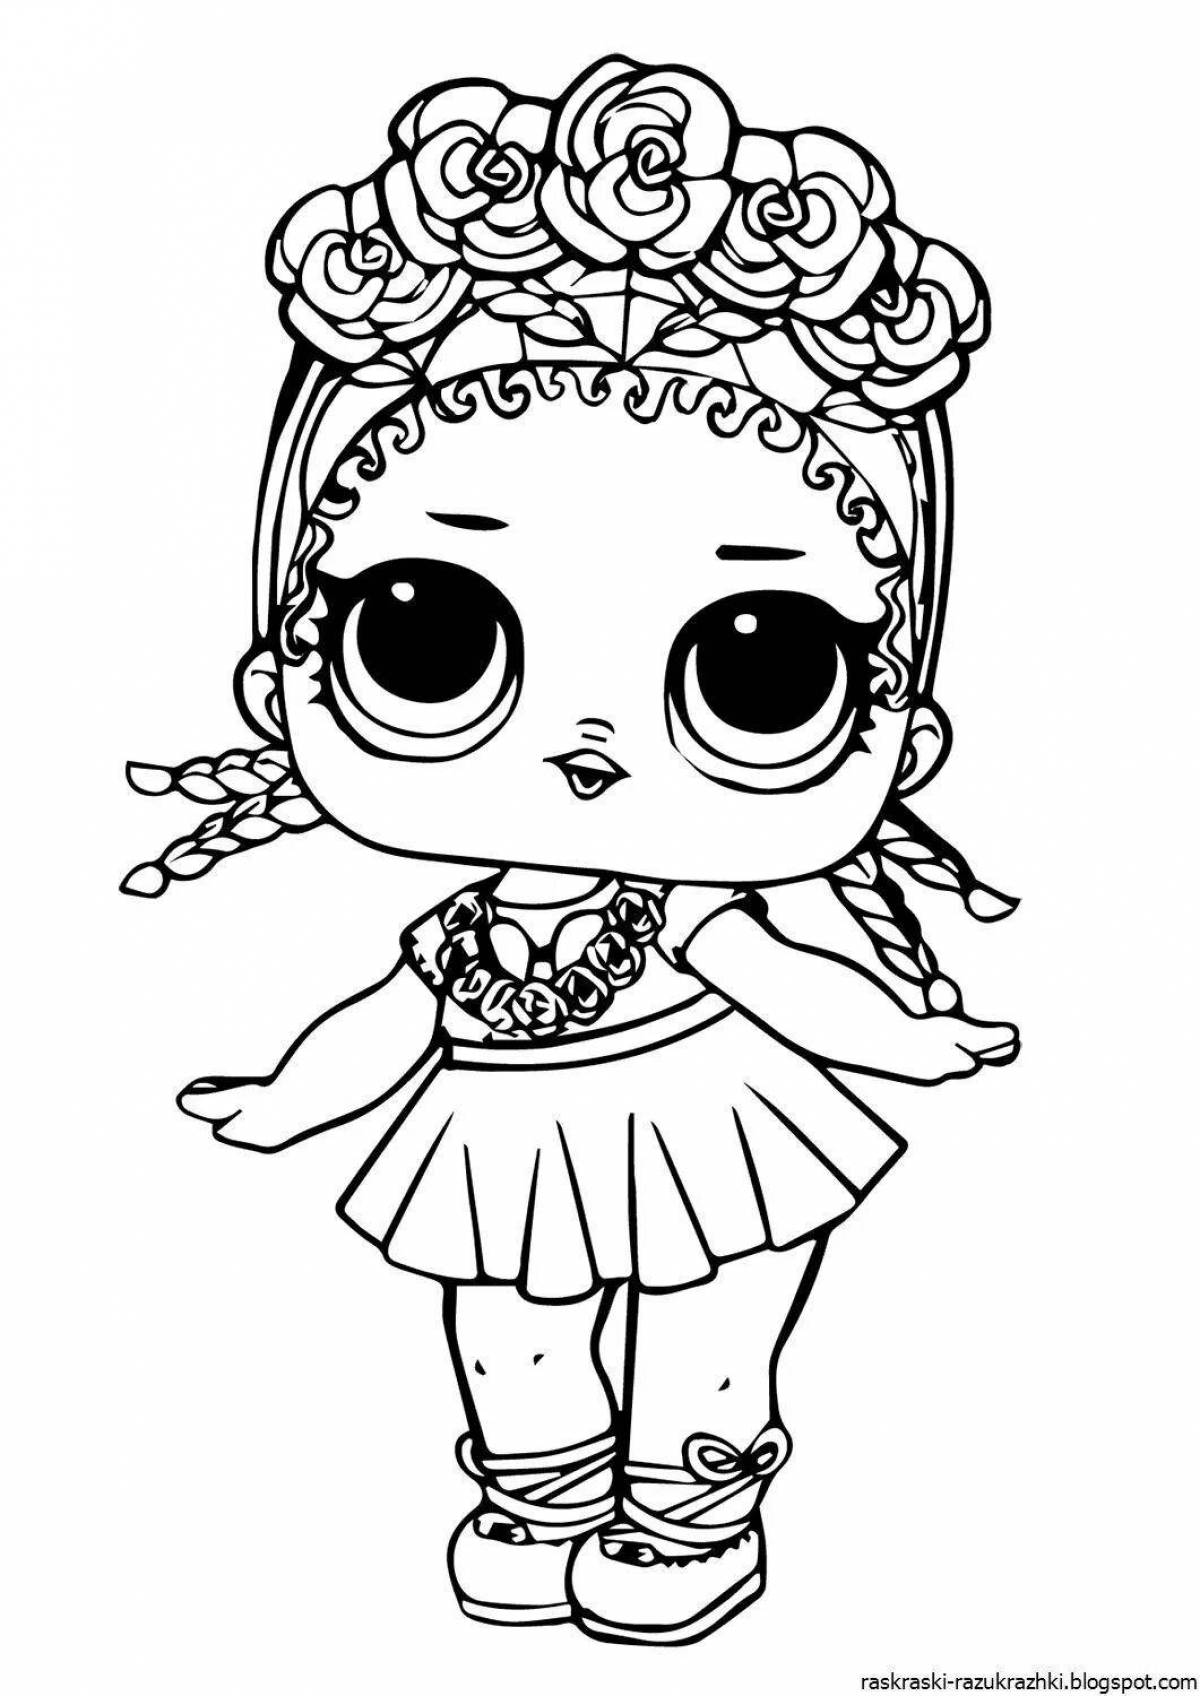 Doll color-explosion coloring page for children 6-7 years old